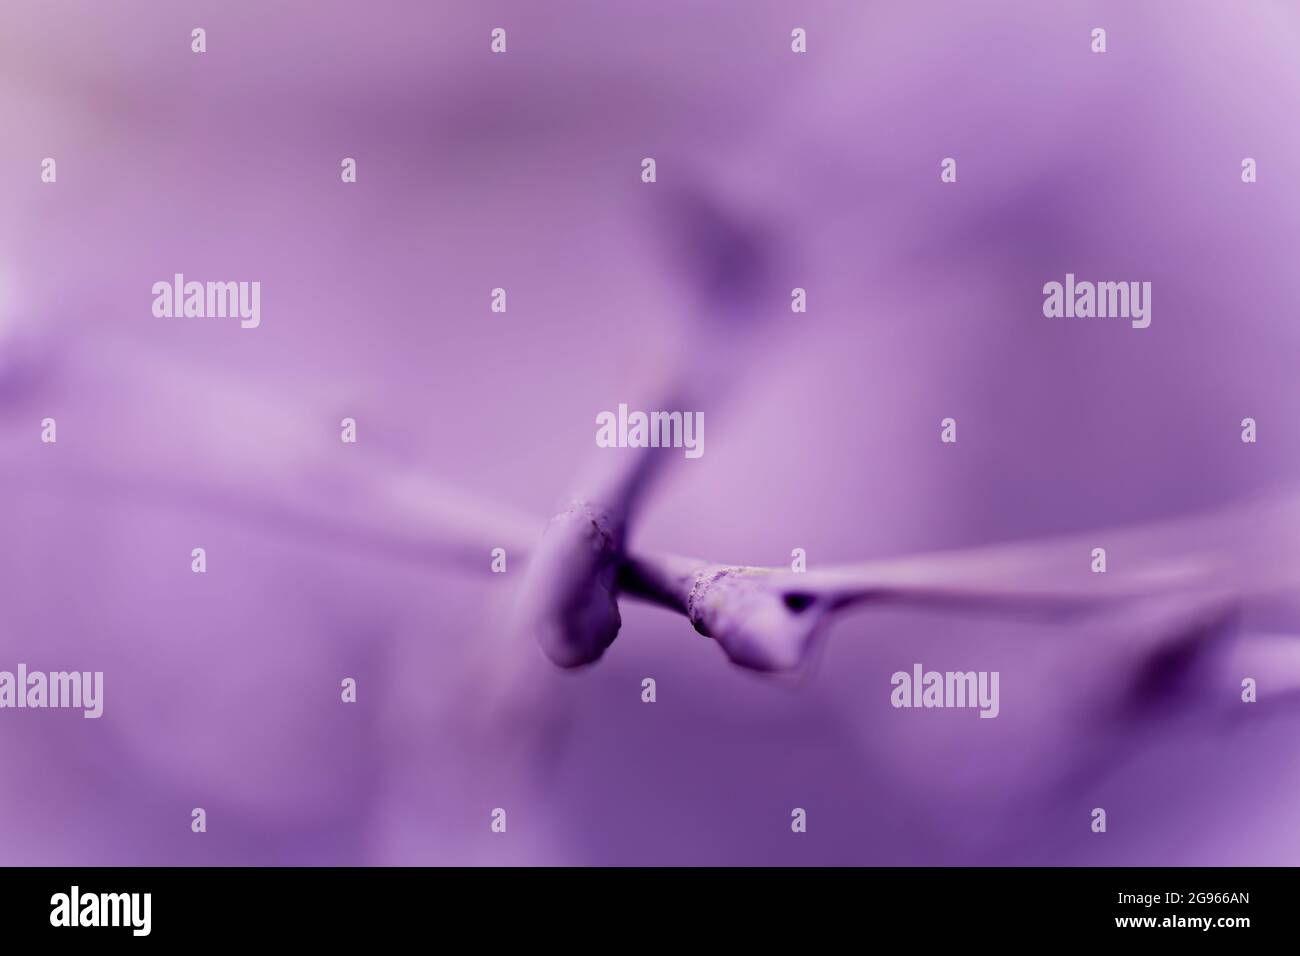 Connections in violet as graphical elements. Stock Photo